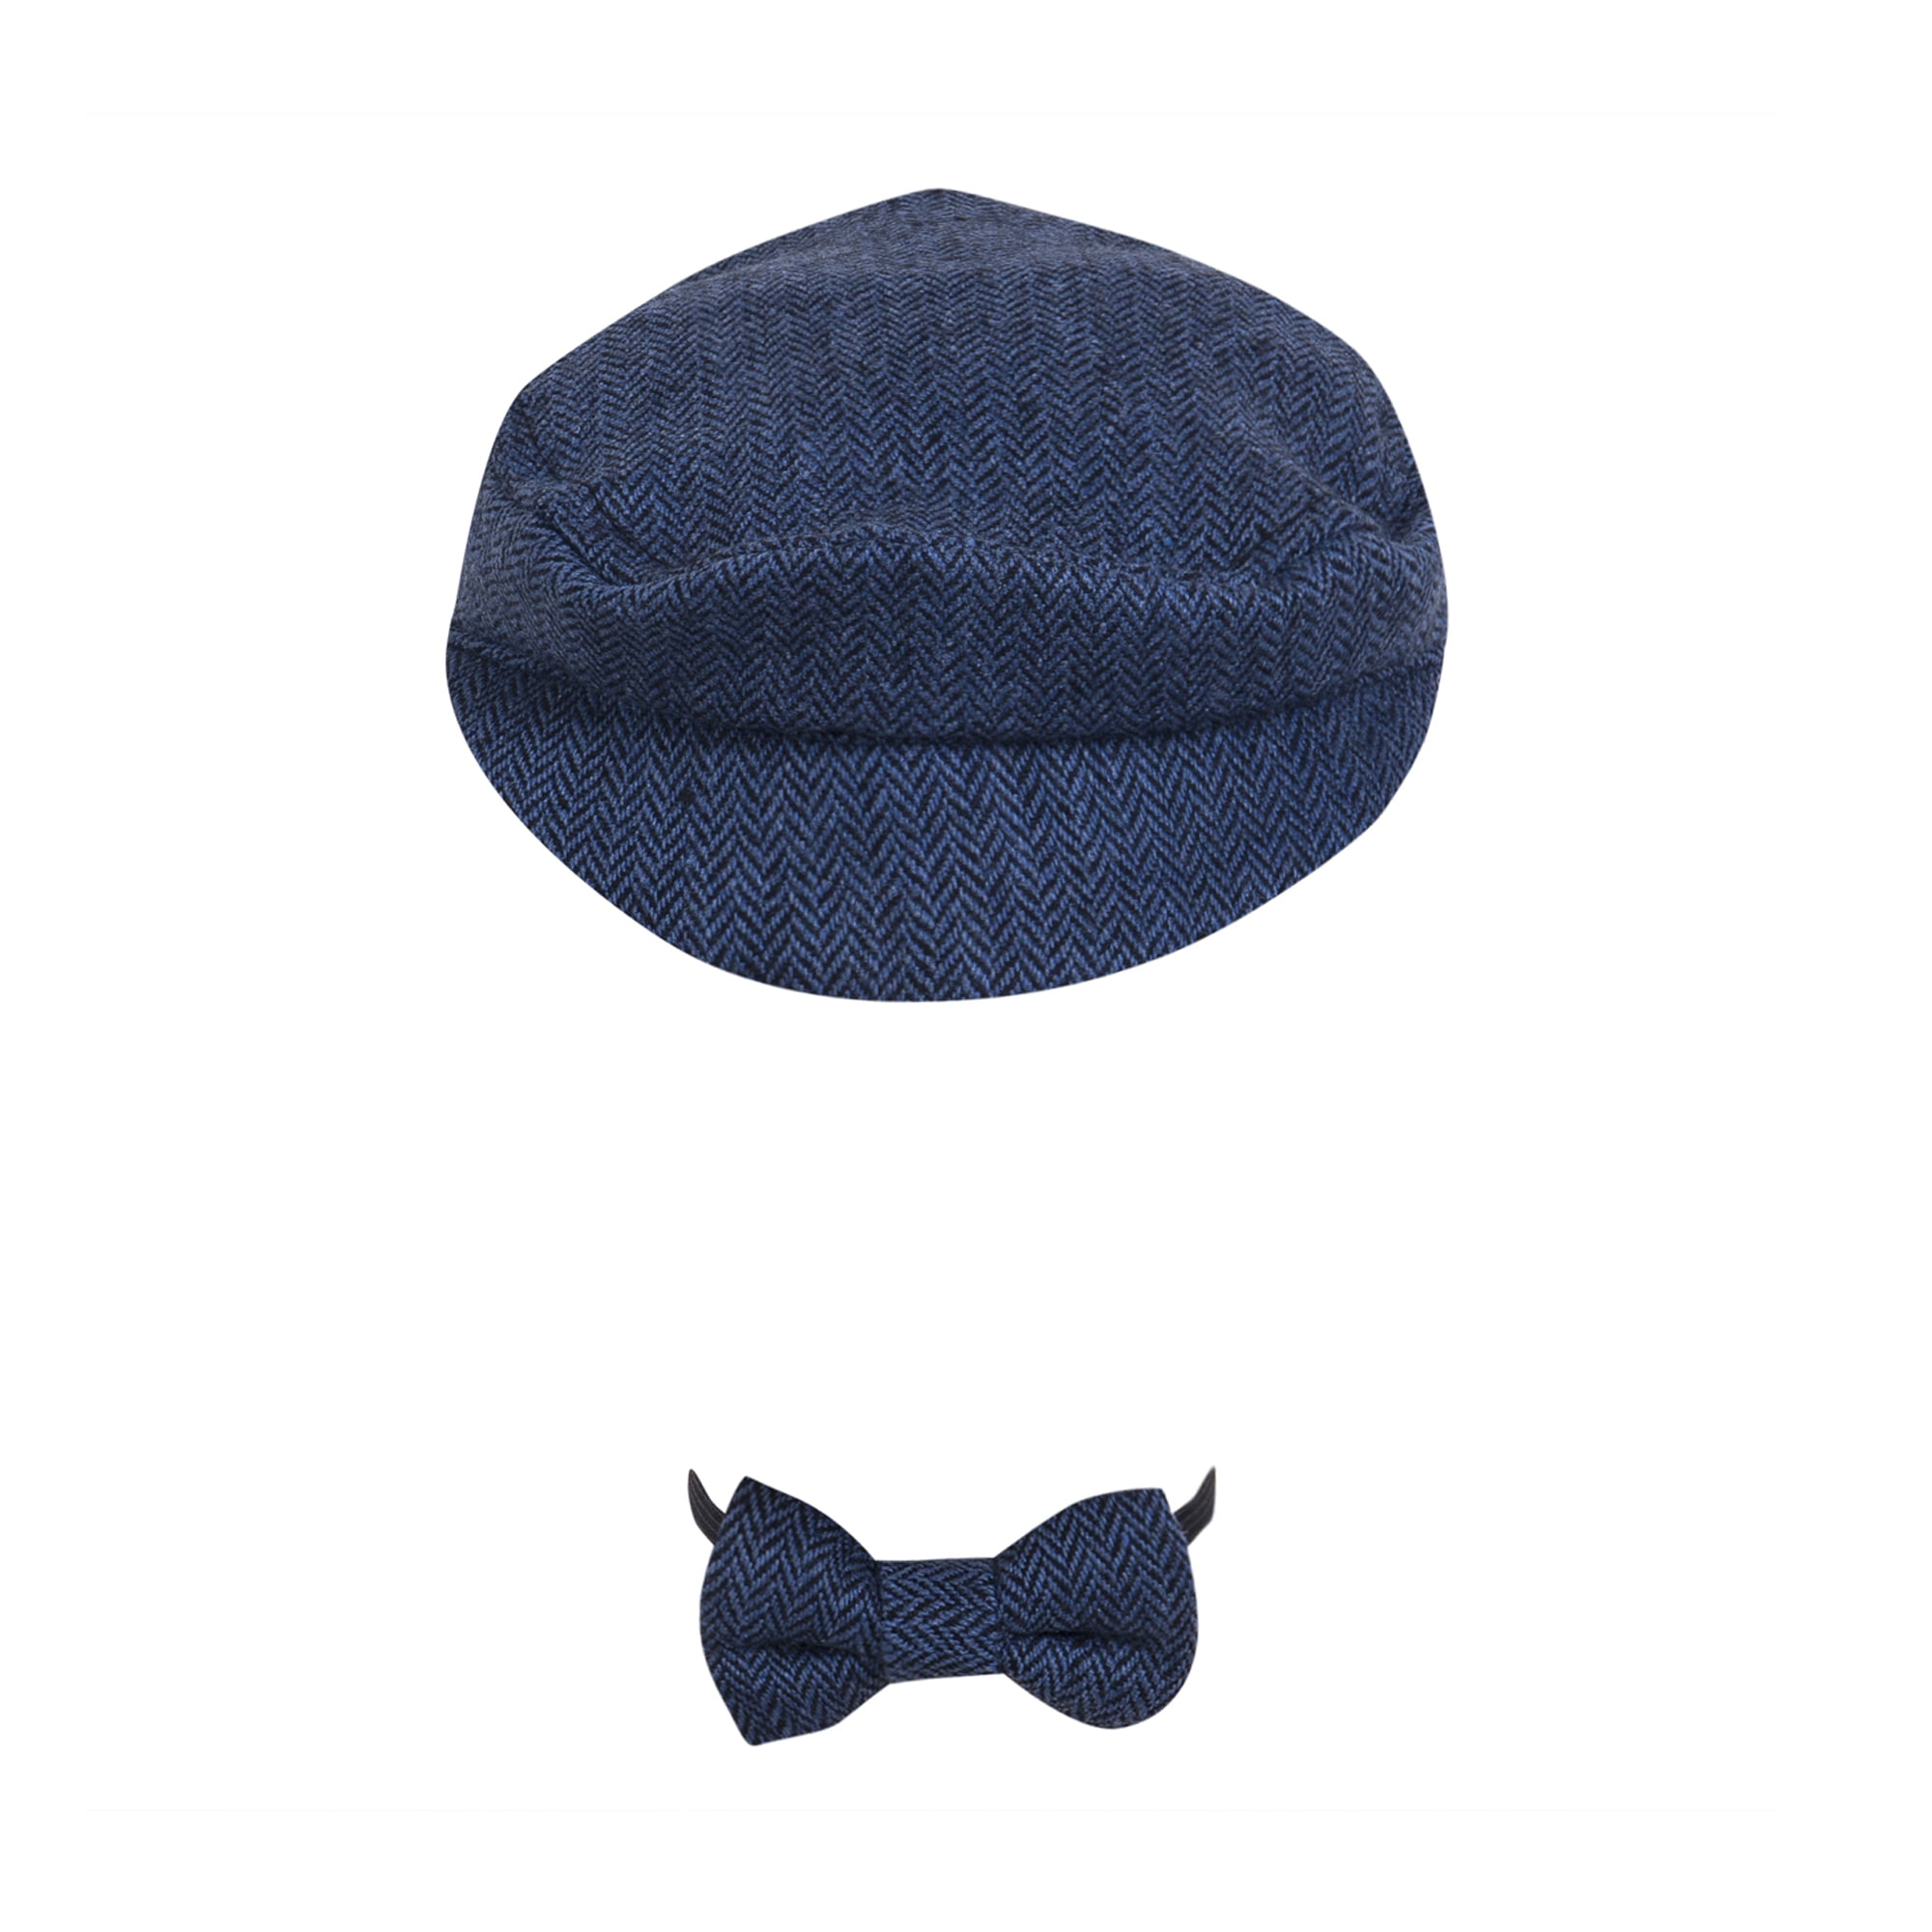 Baby Newborn Peaked Beanie Cap Hat Bow Tie Photo Photography Prop Outfit Set 